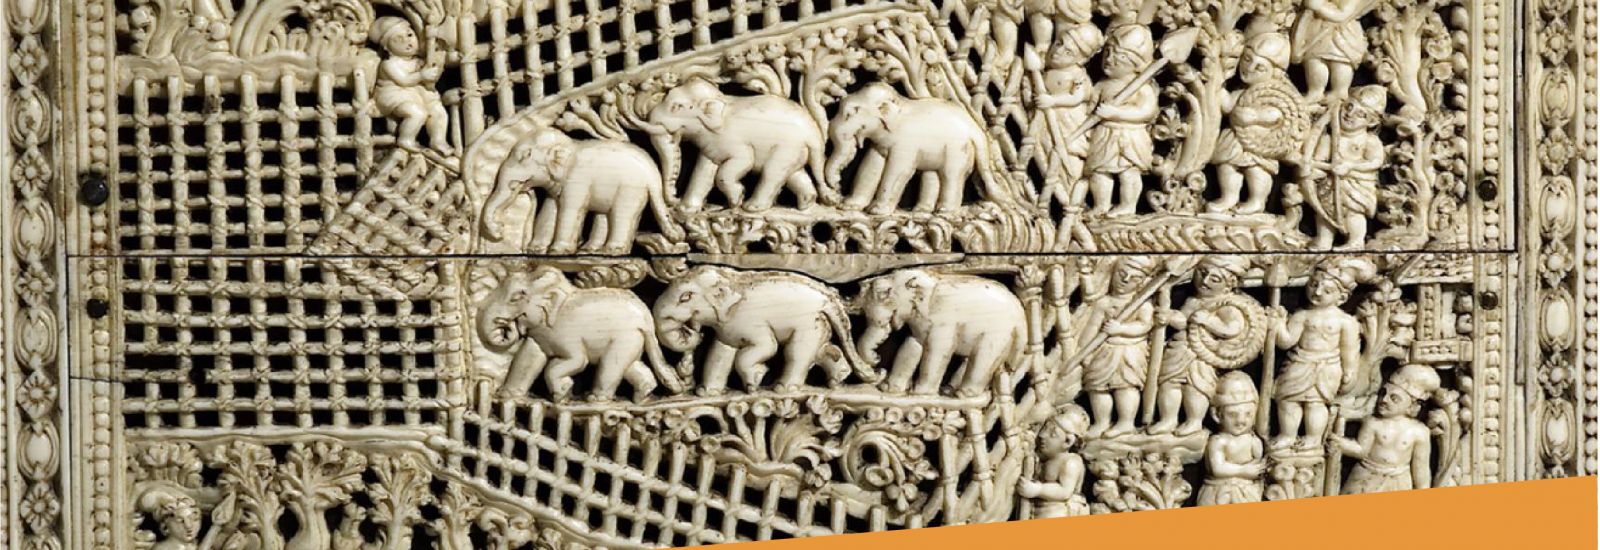 Ivory carving in the Ashmolean Museum showing men and elephants.